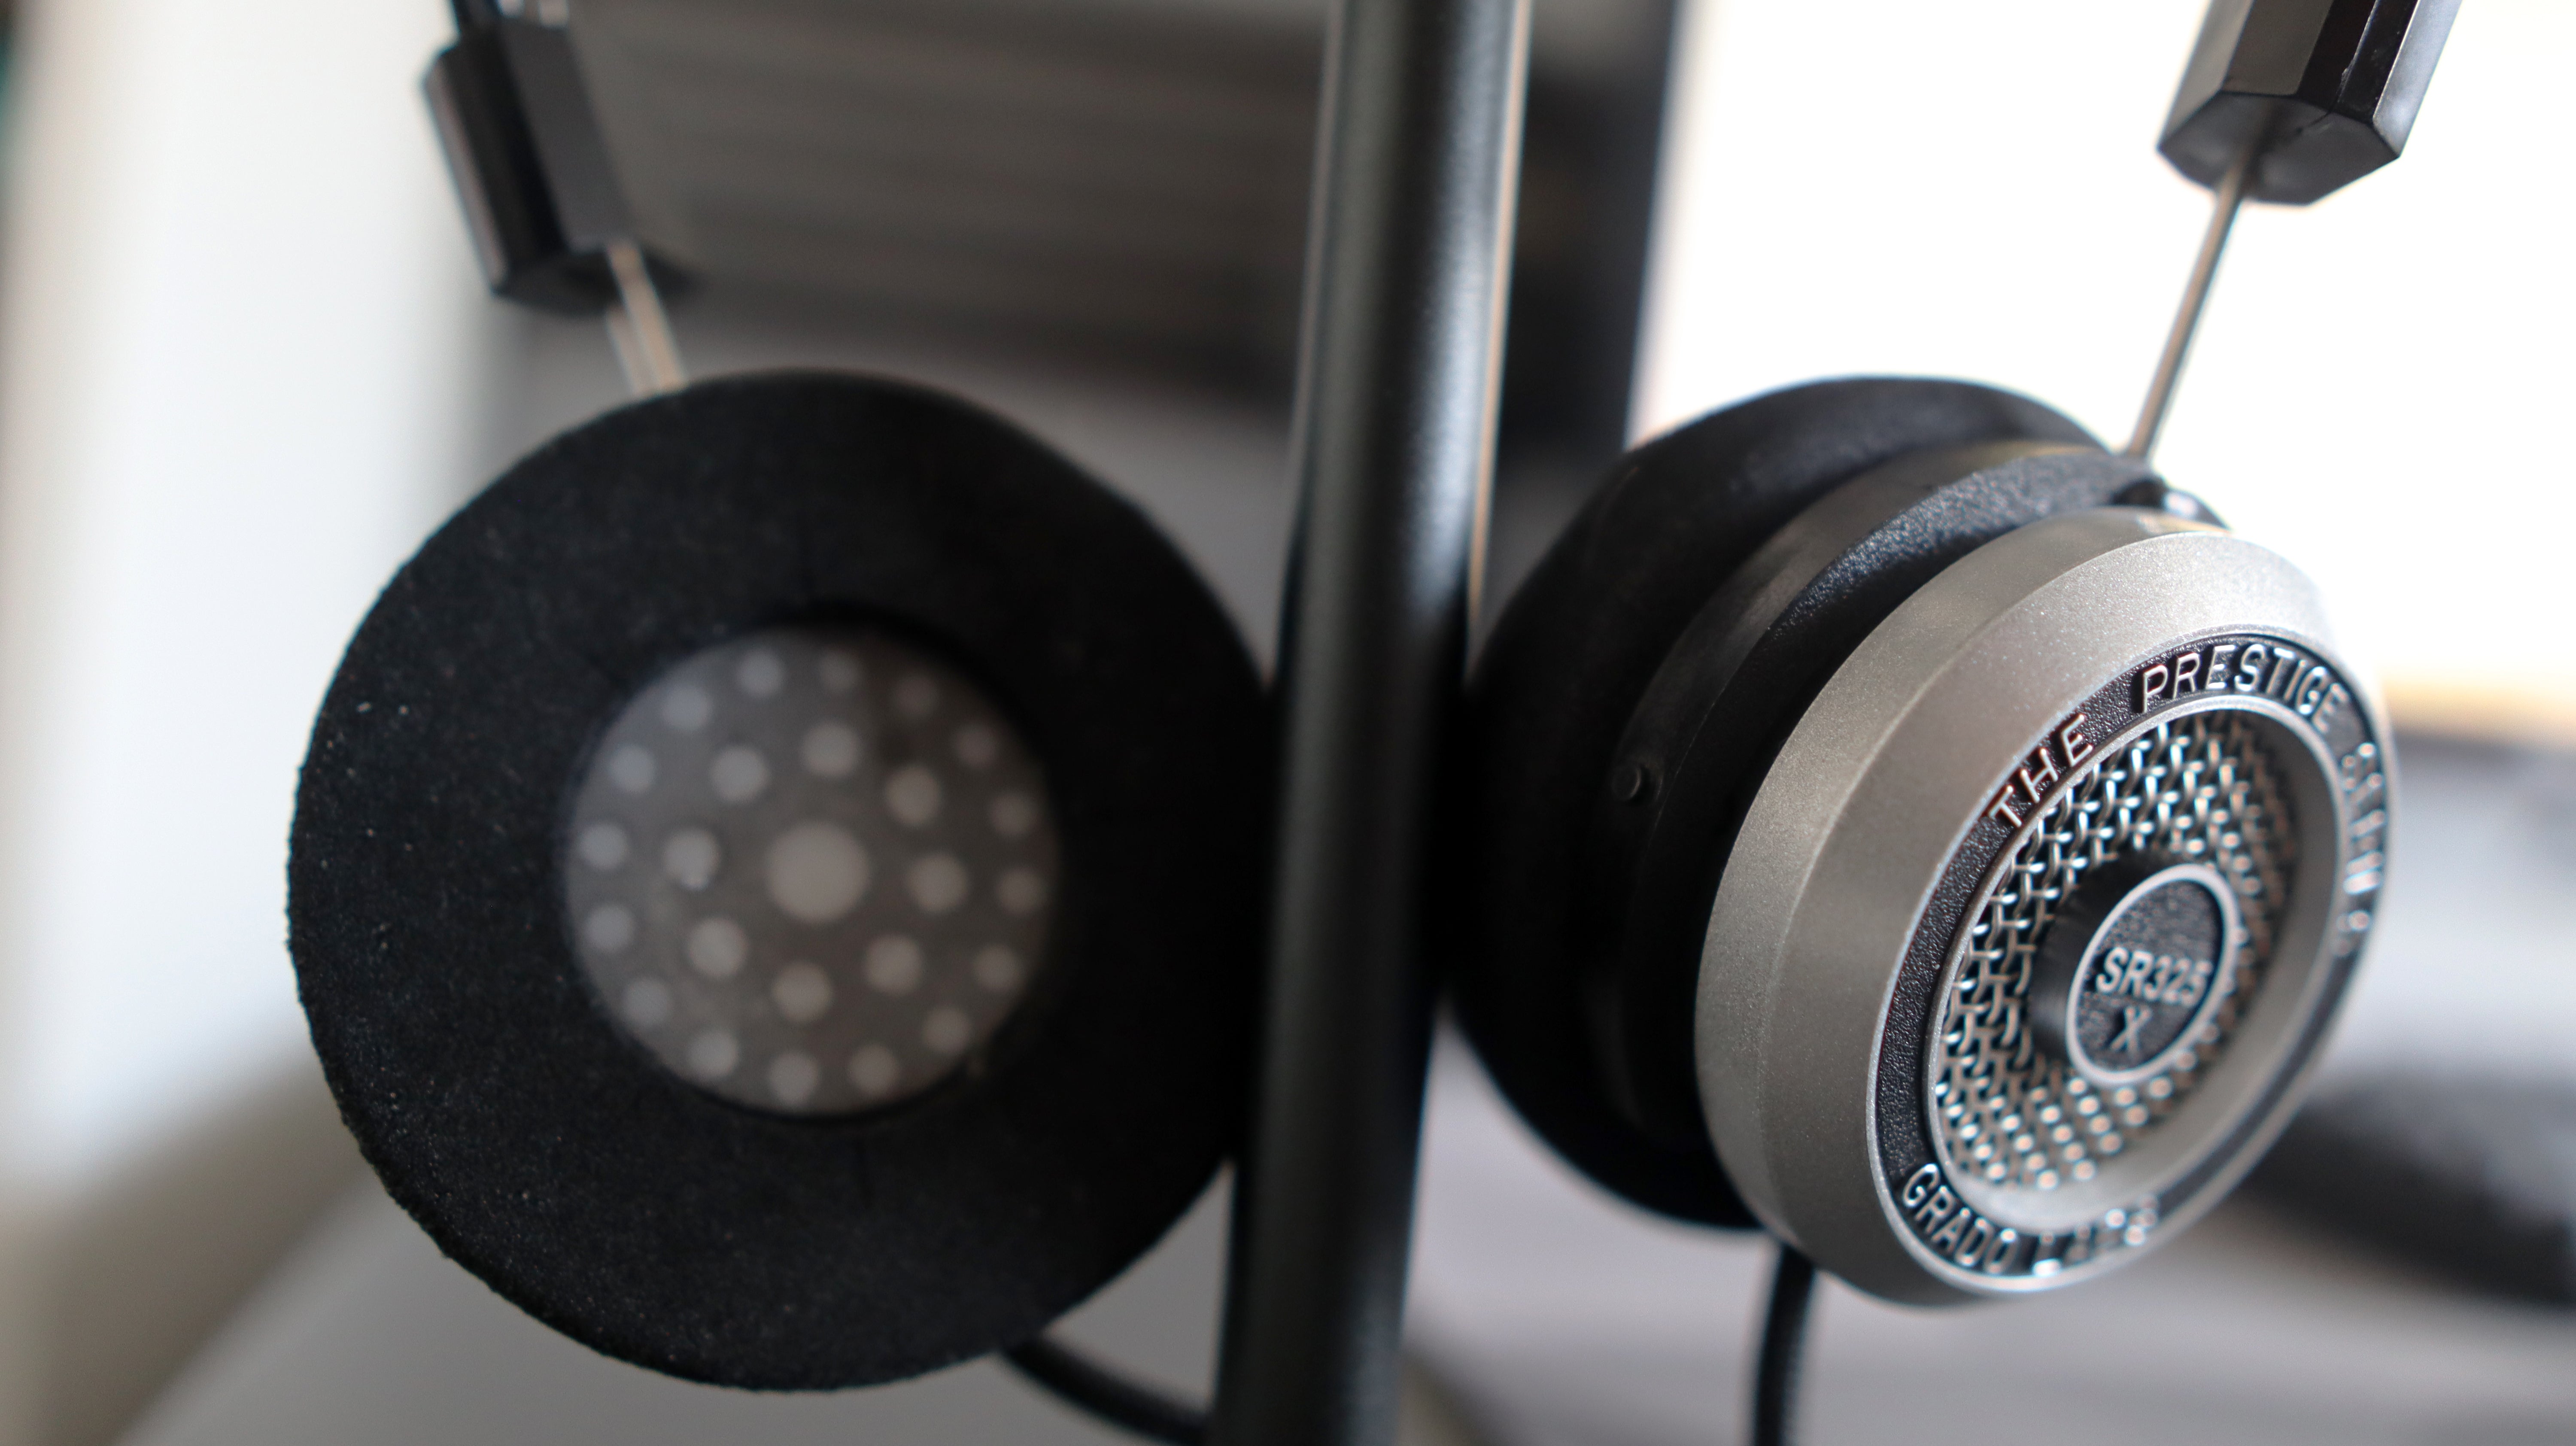 Grado SR325x review: Ideal cans for home-listening and even gaming